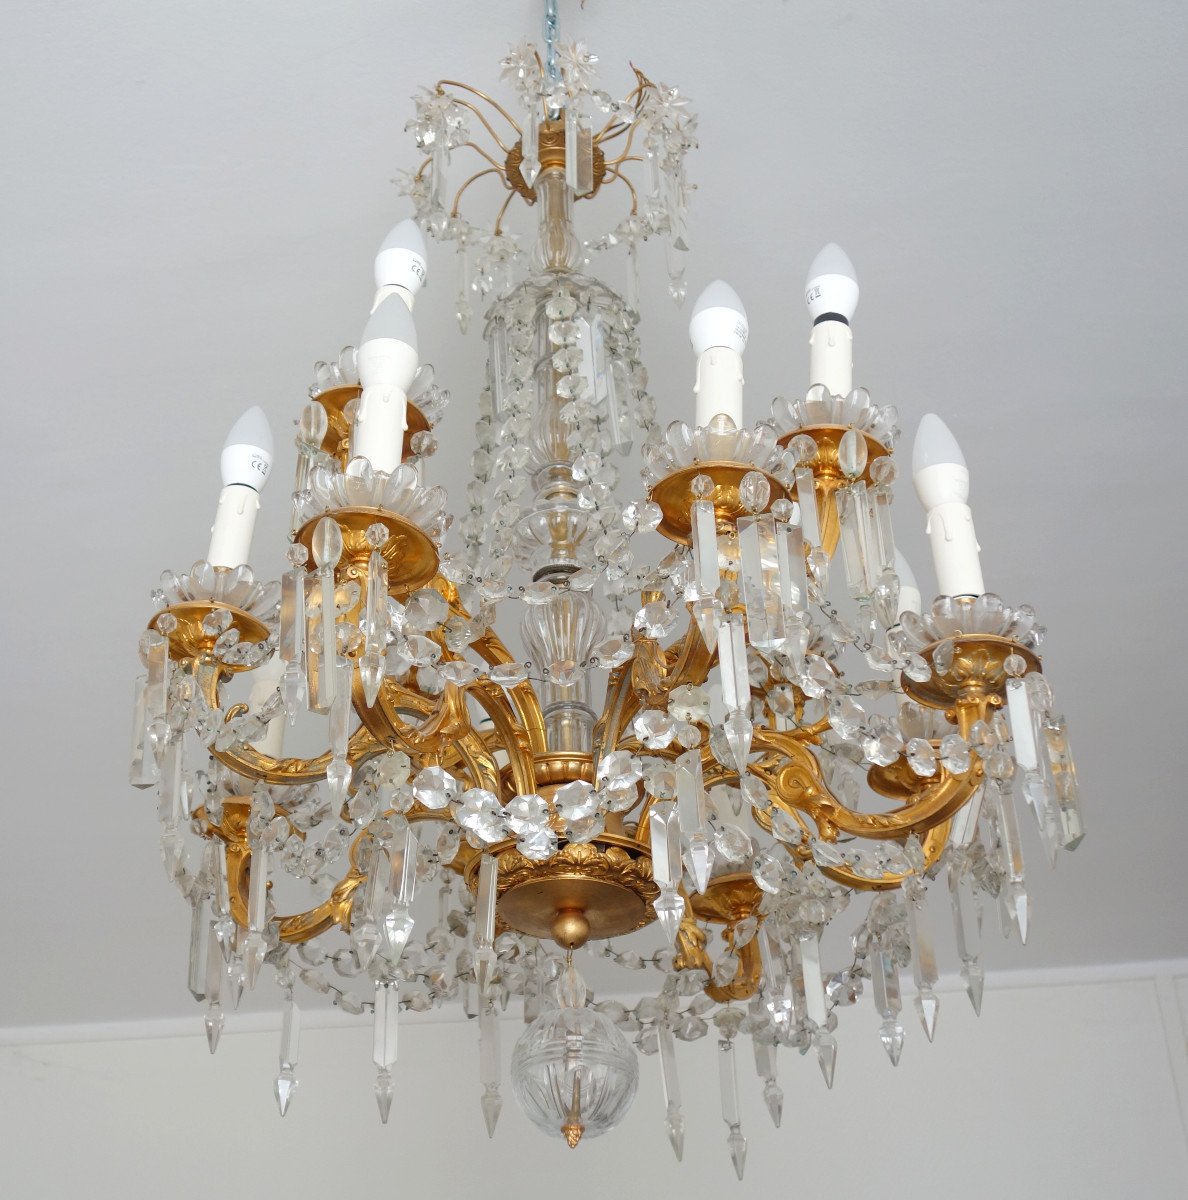 Baccarat - Chandelier 10 Lights In Chased Bronze And Gilded With Fine Gold - Late 19th Century-photo-2